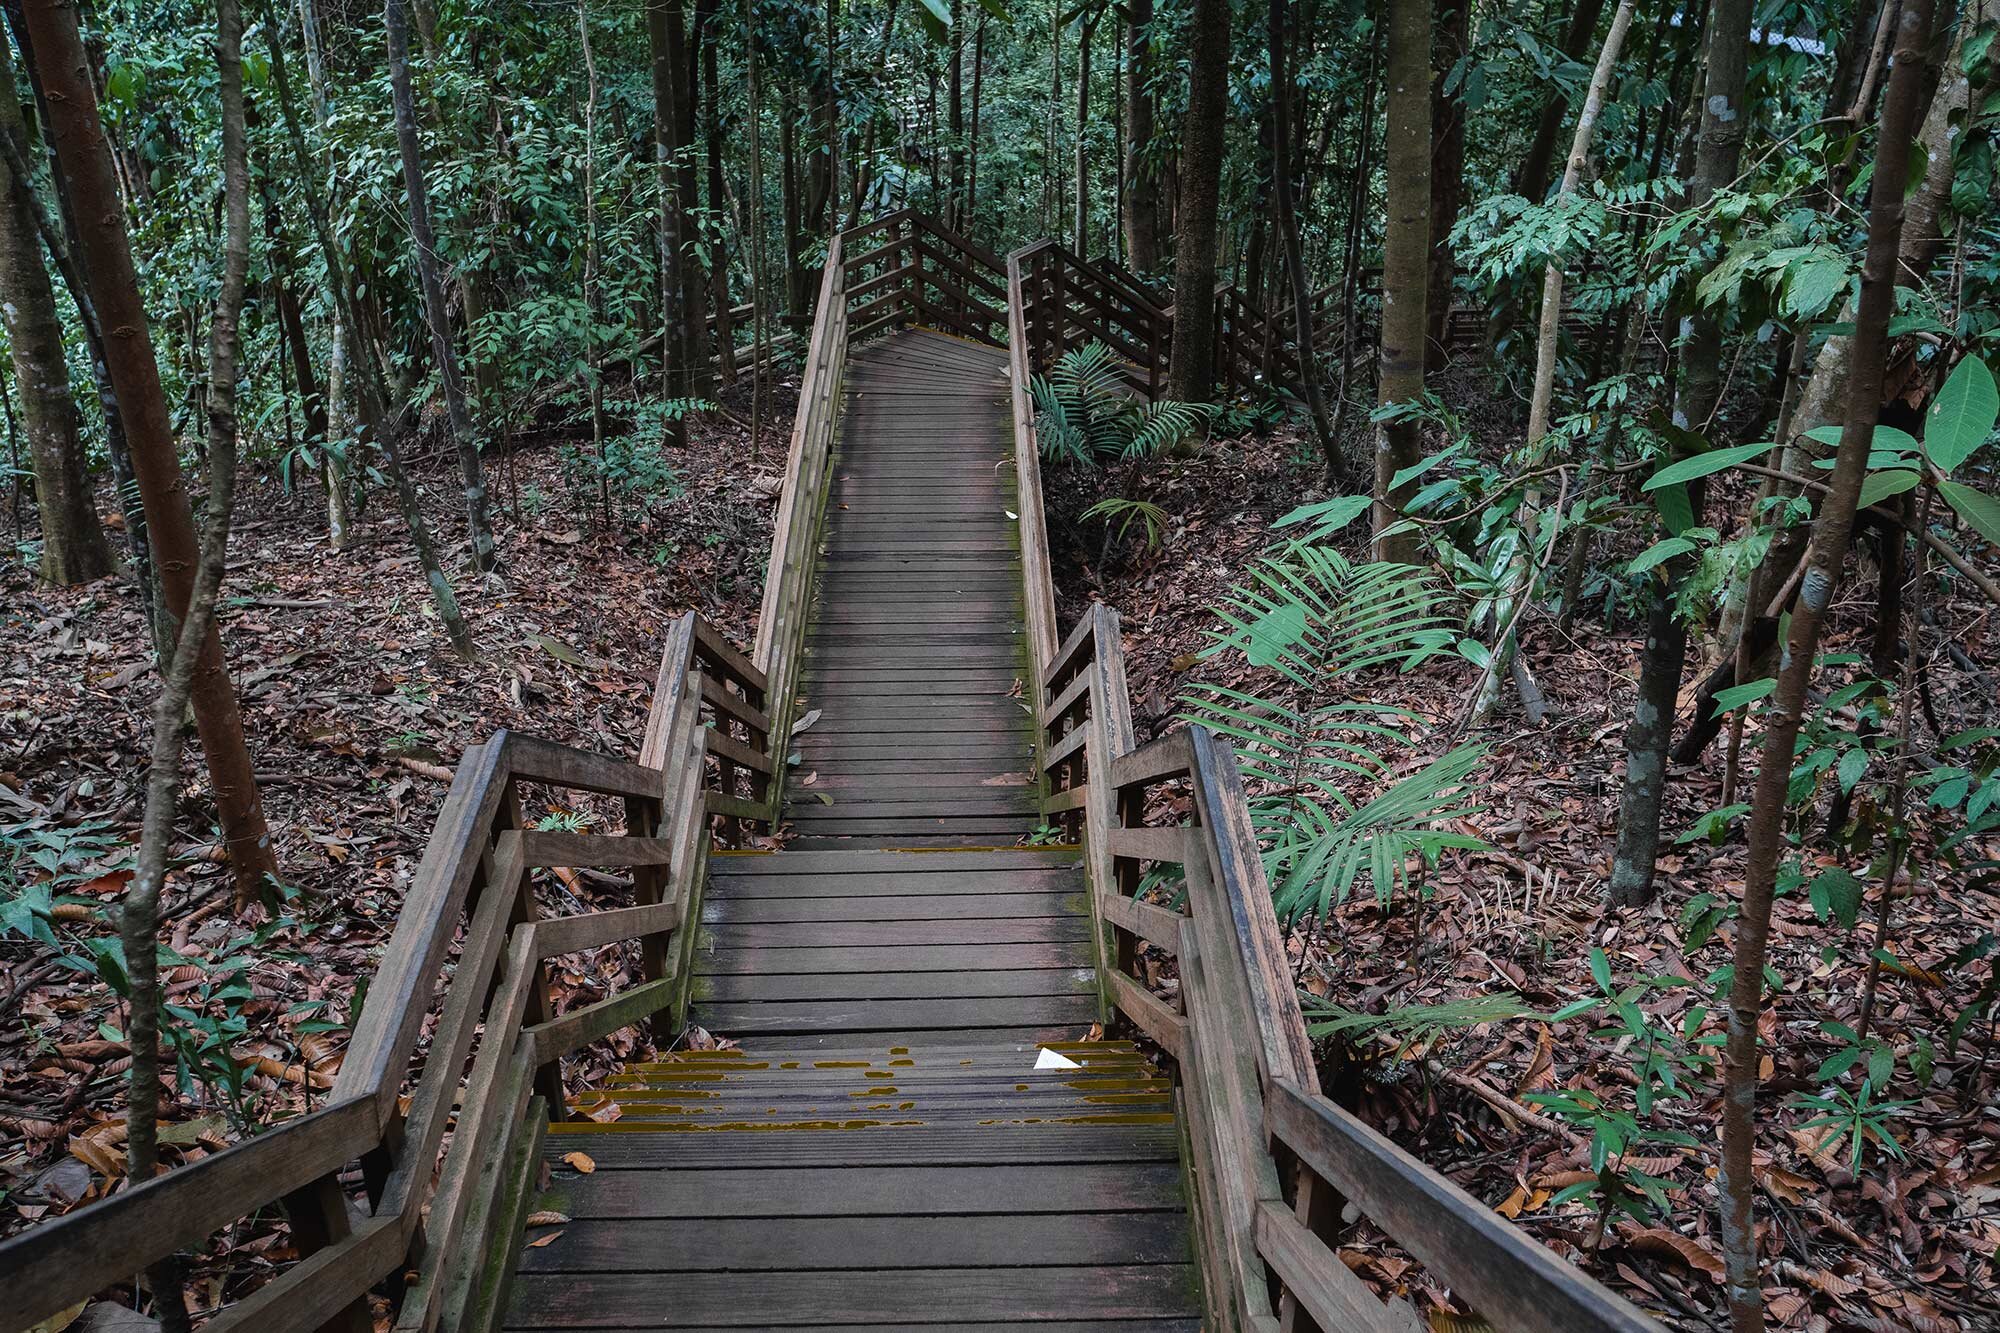 MacRitchie is an excellent destination for anyone who loves fun and the outdoors.